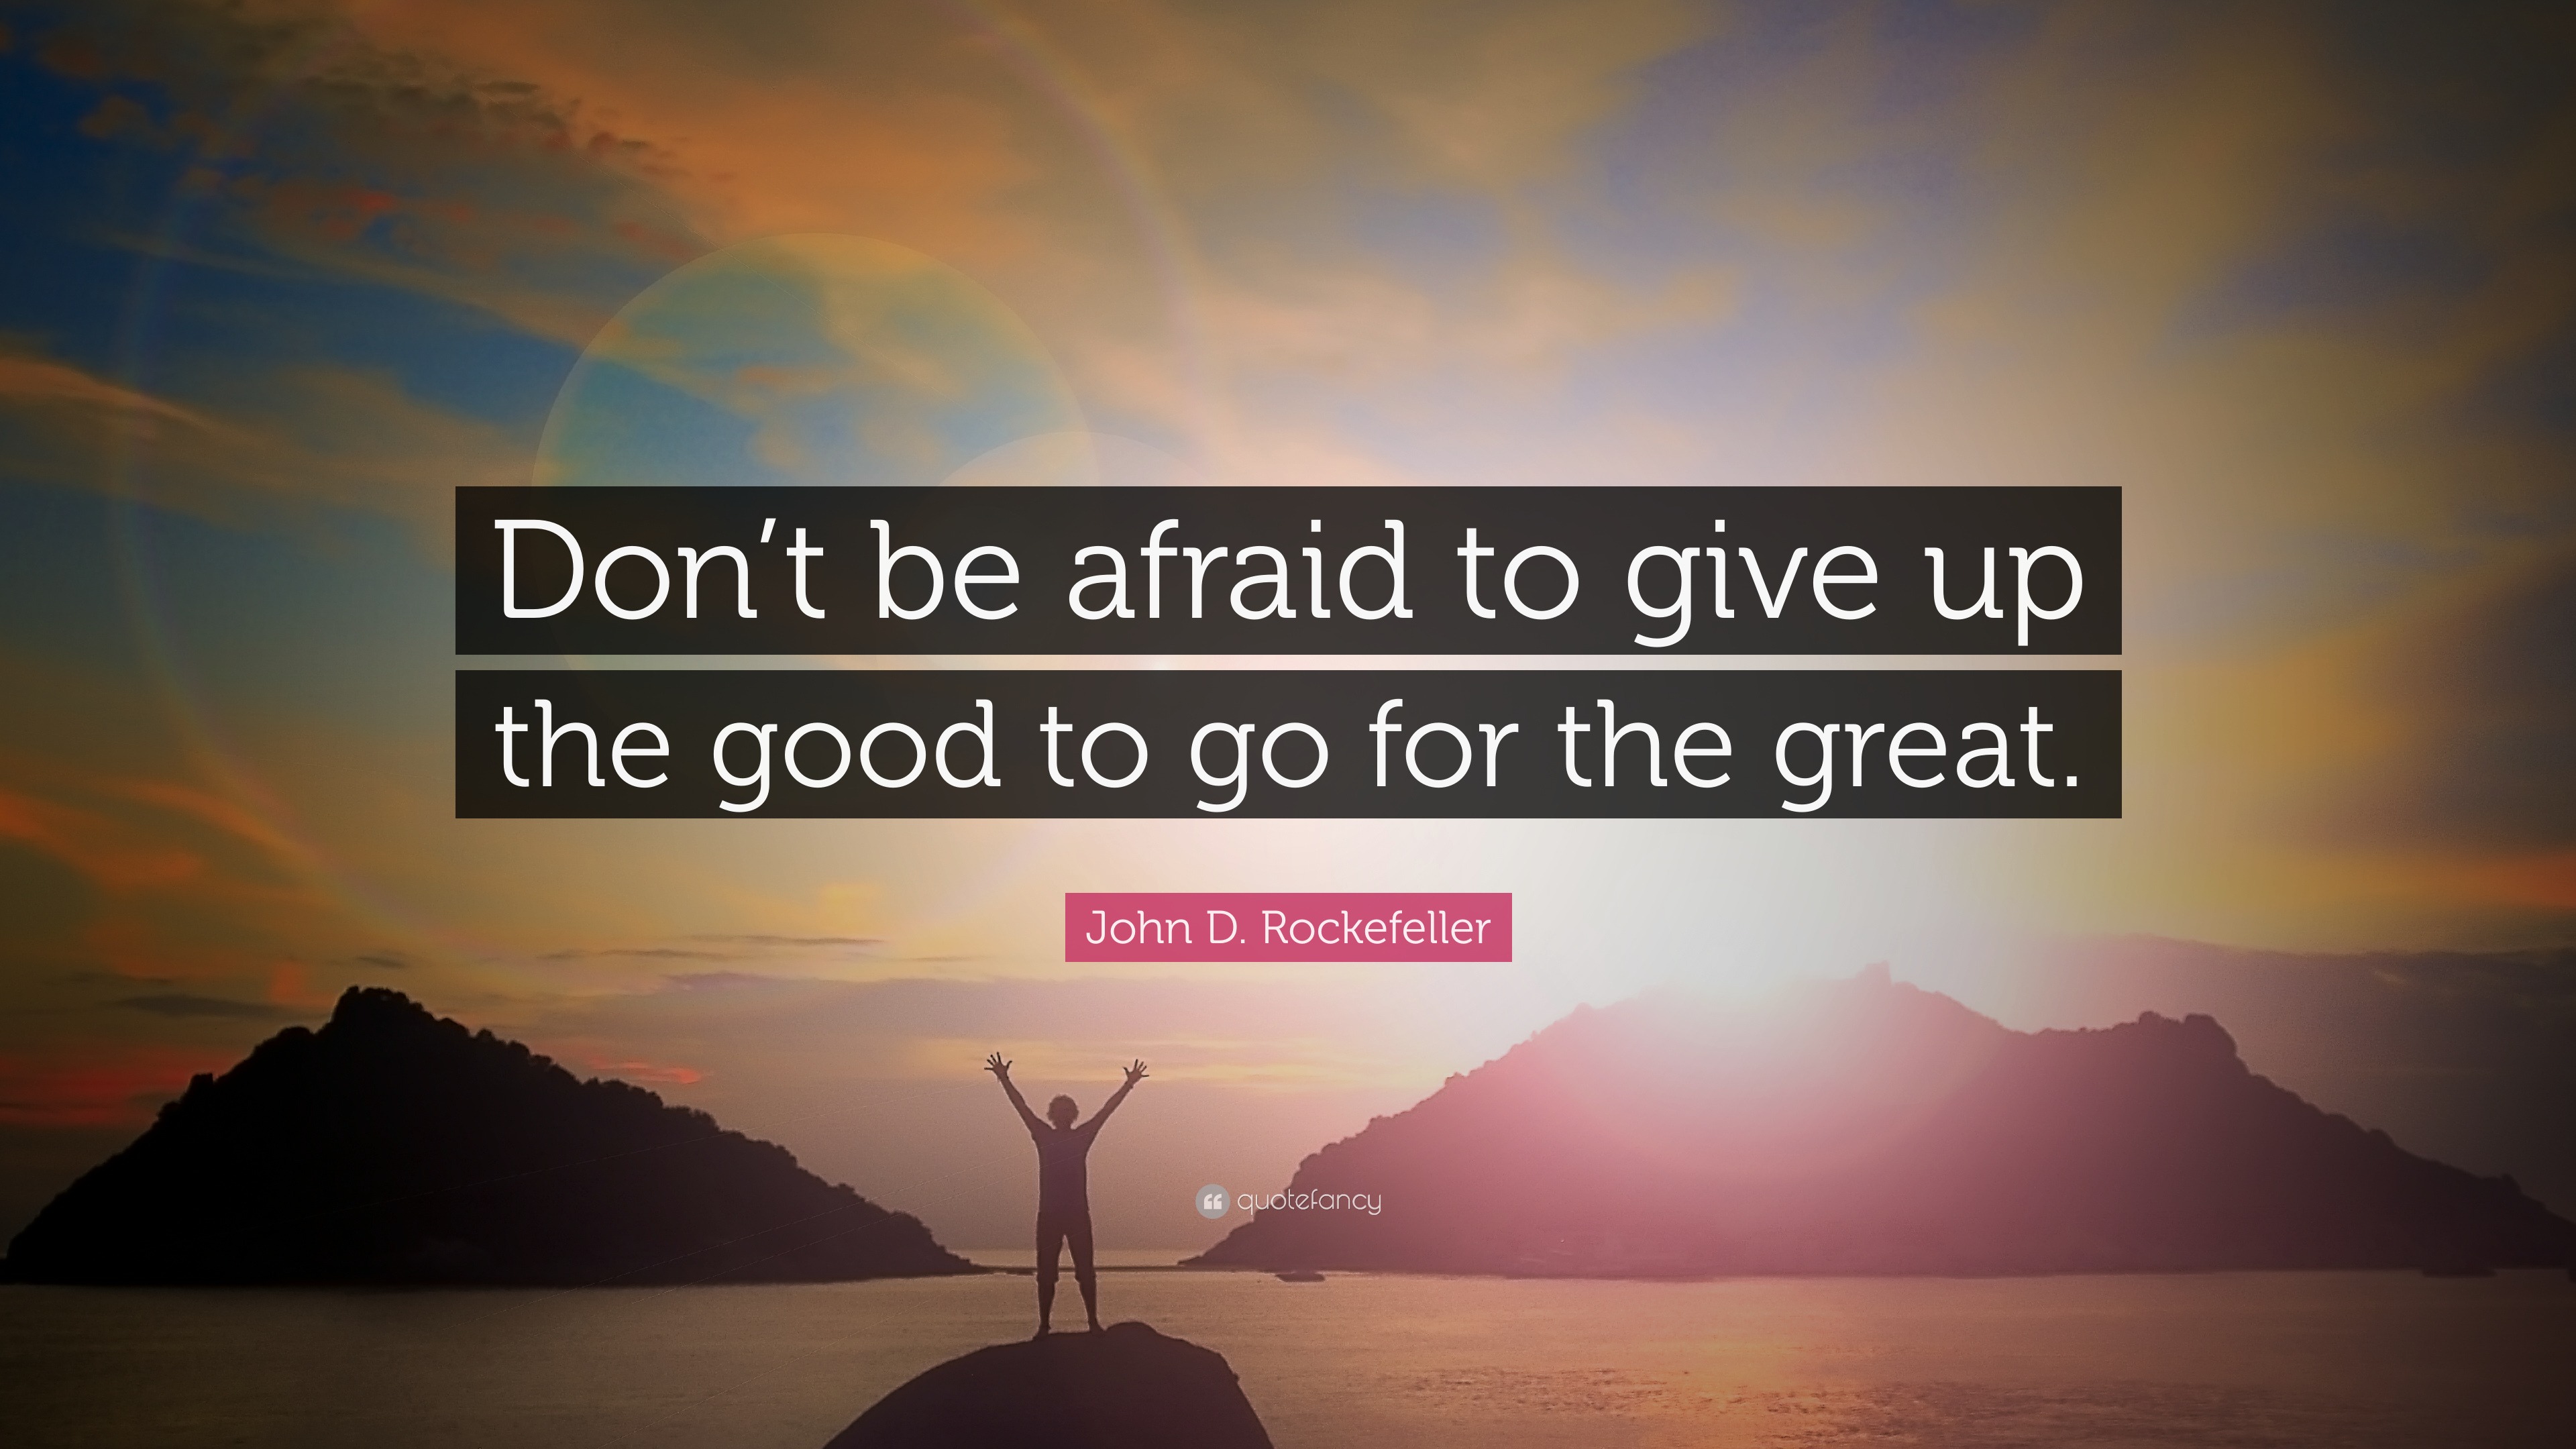 John D. Rockefeller Quote: “Don’t be afraid to give up the good to go ...